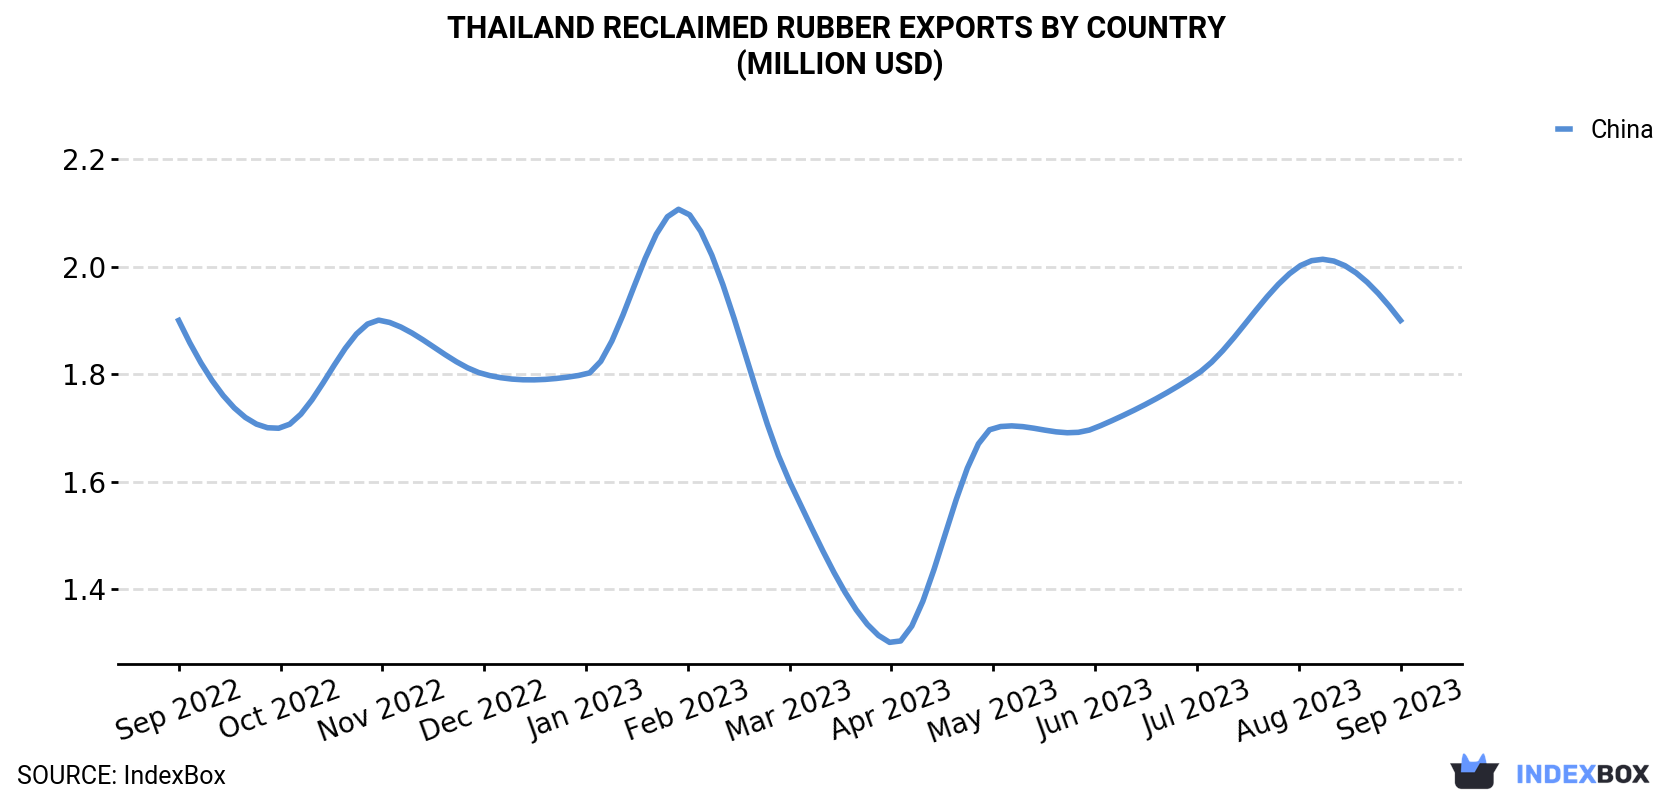 Thailand Reclaimed Rubber Exports By Country (Million USD)